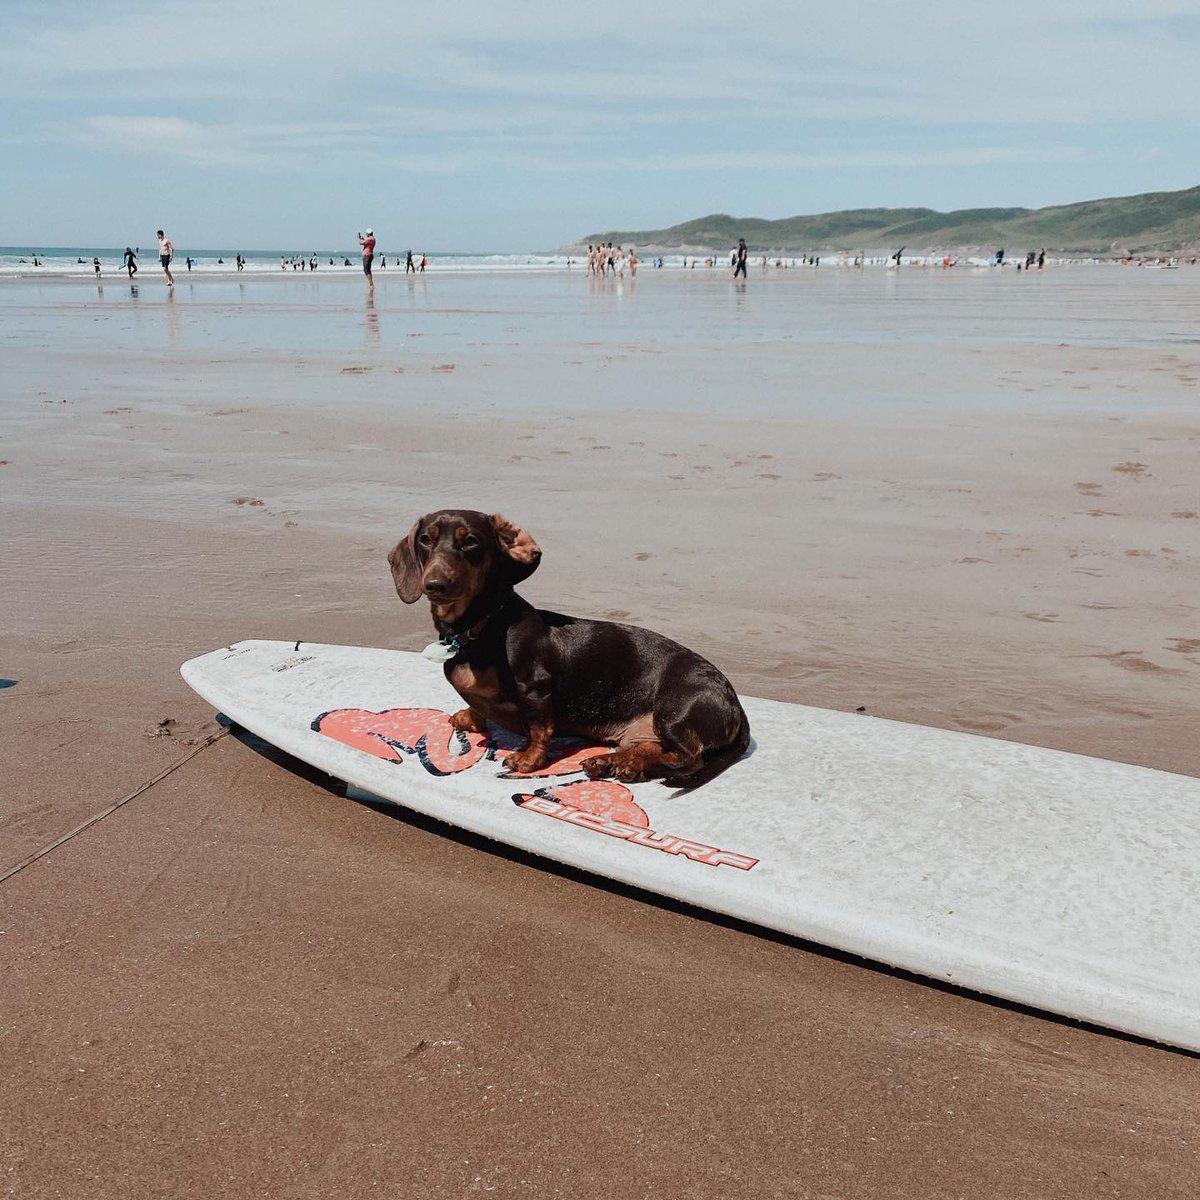 As we near the summer season, finding beaches for our dogs becomes harder. But don't worry, we've got you covered with all of Devon's Dog-Friendly beaches right here👇 📸 by lucasandsanti on Instagram bit.ly/3o8r3y0